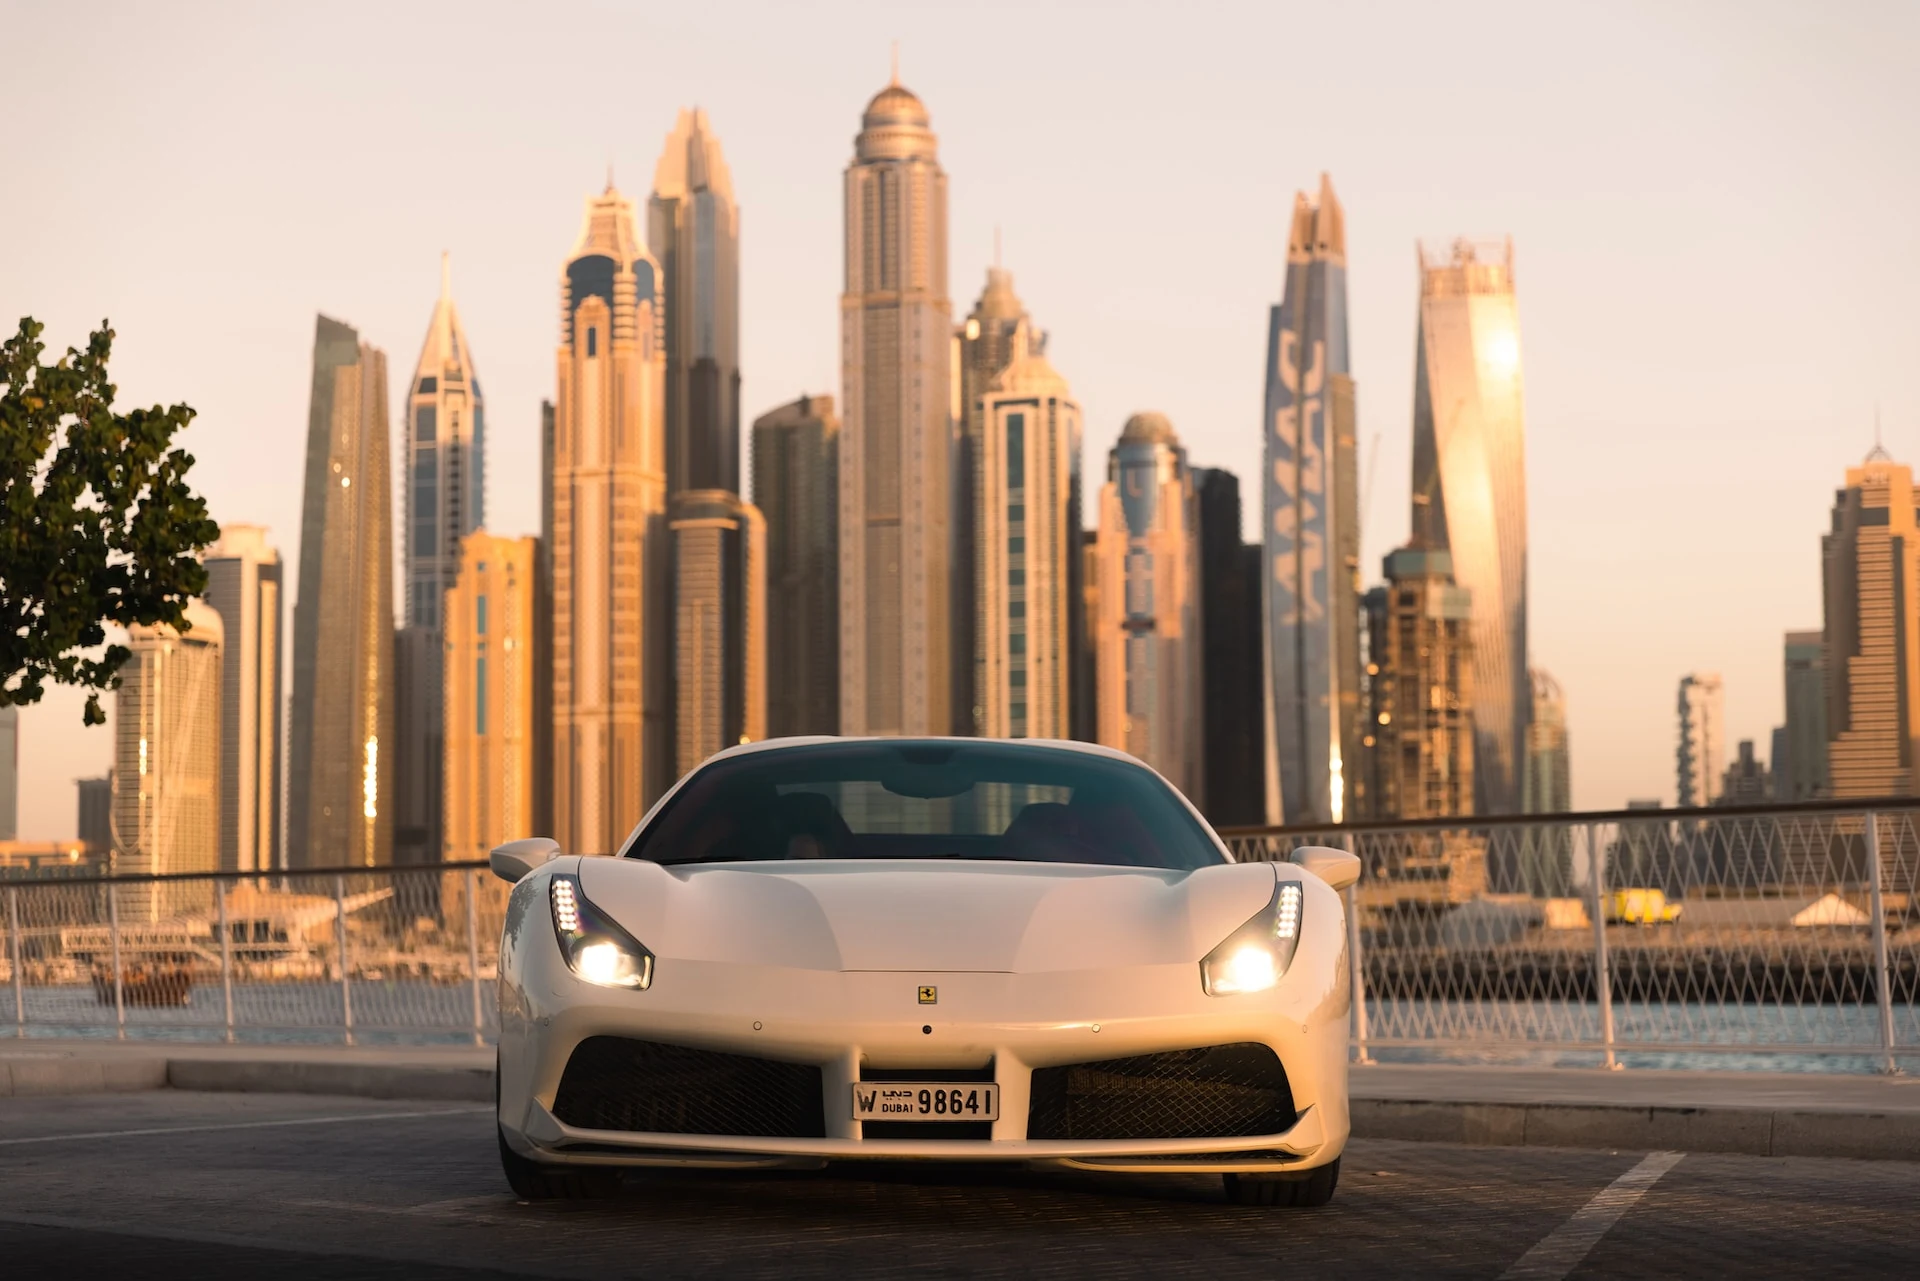 Ferrari 488 Spider by the docks at the Palm in Dubai - free stock photo